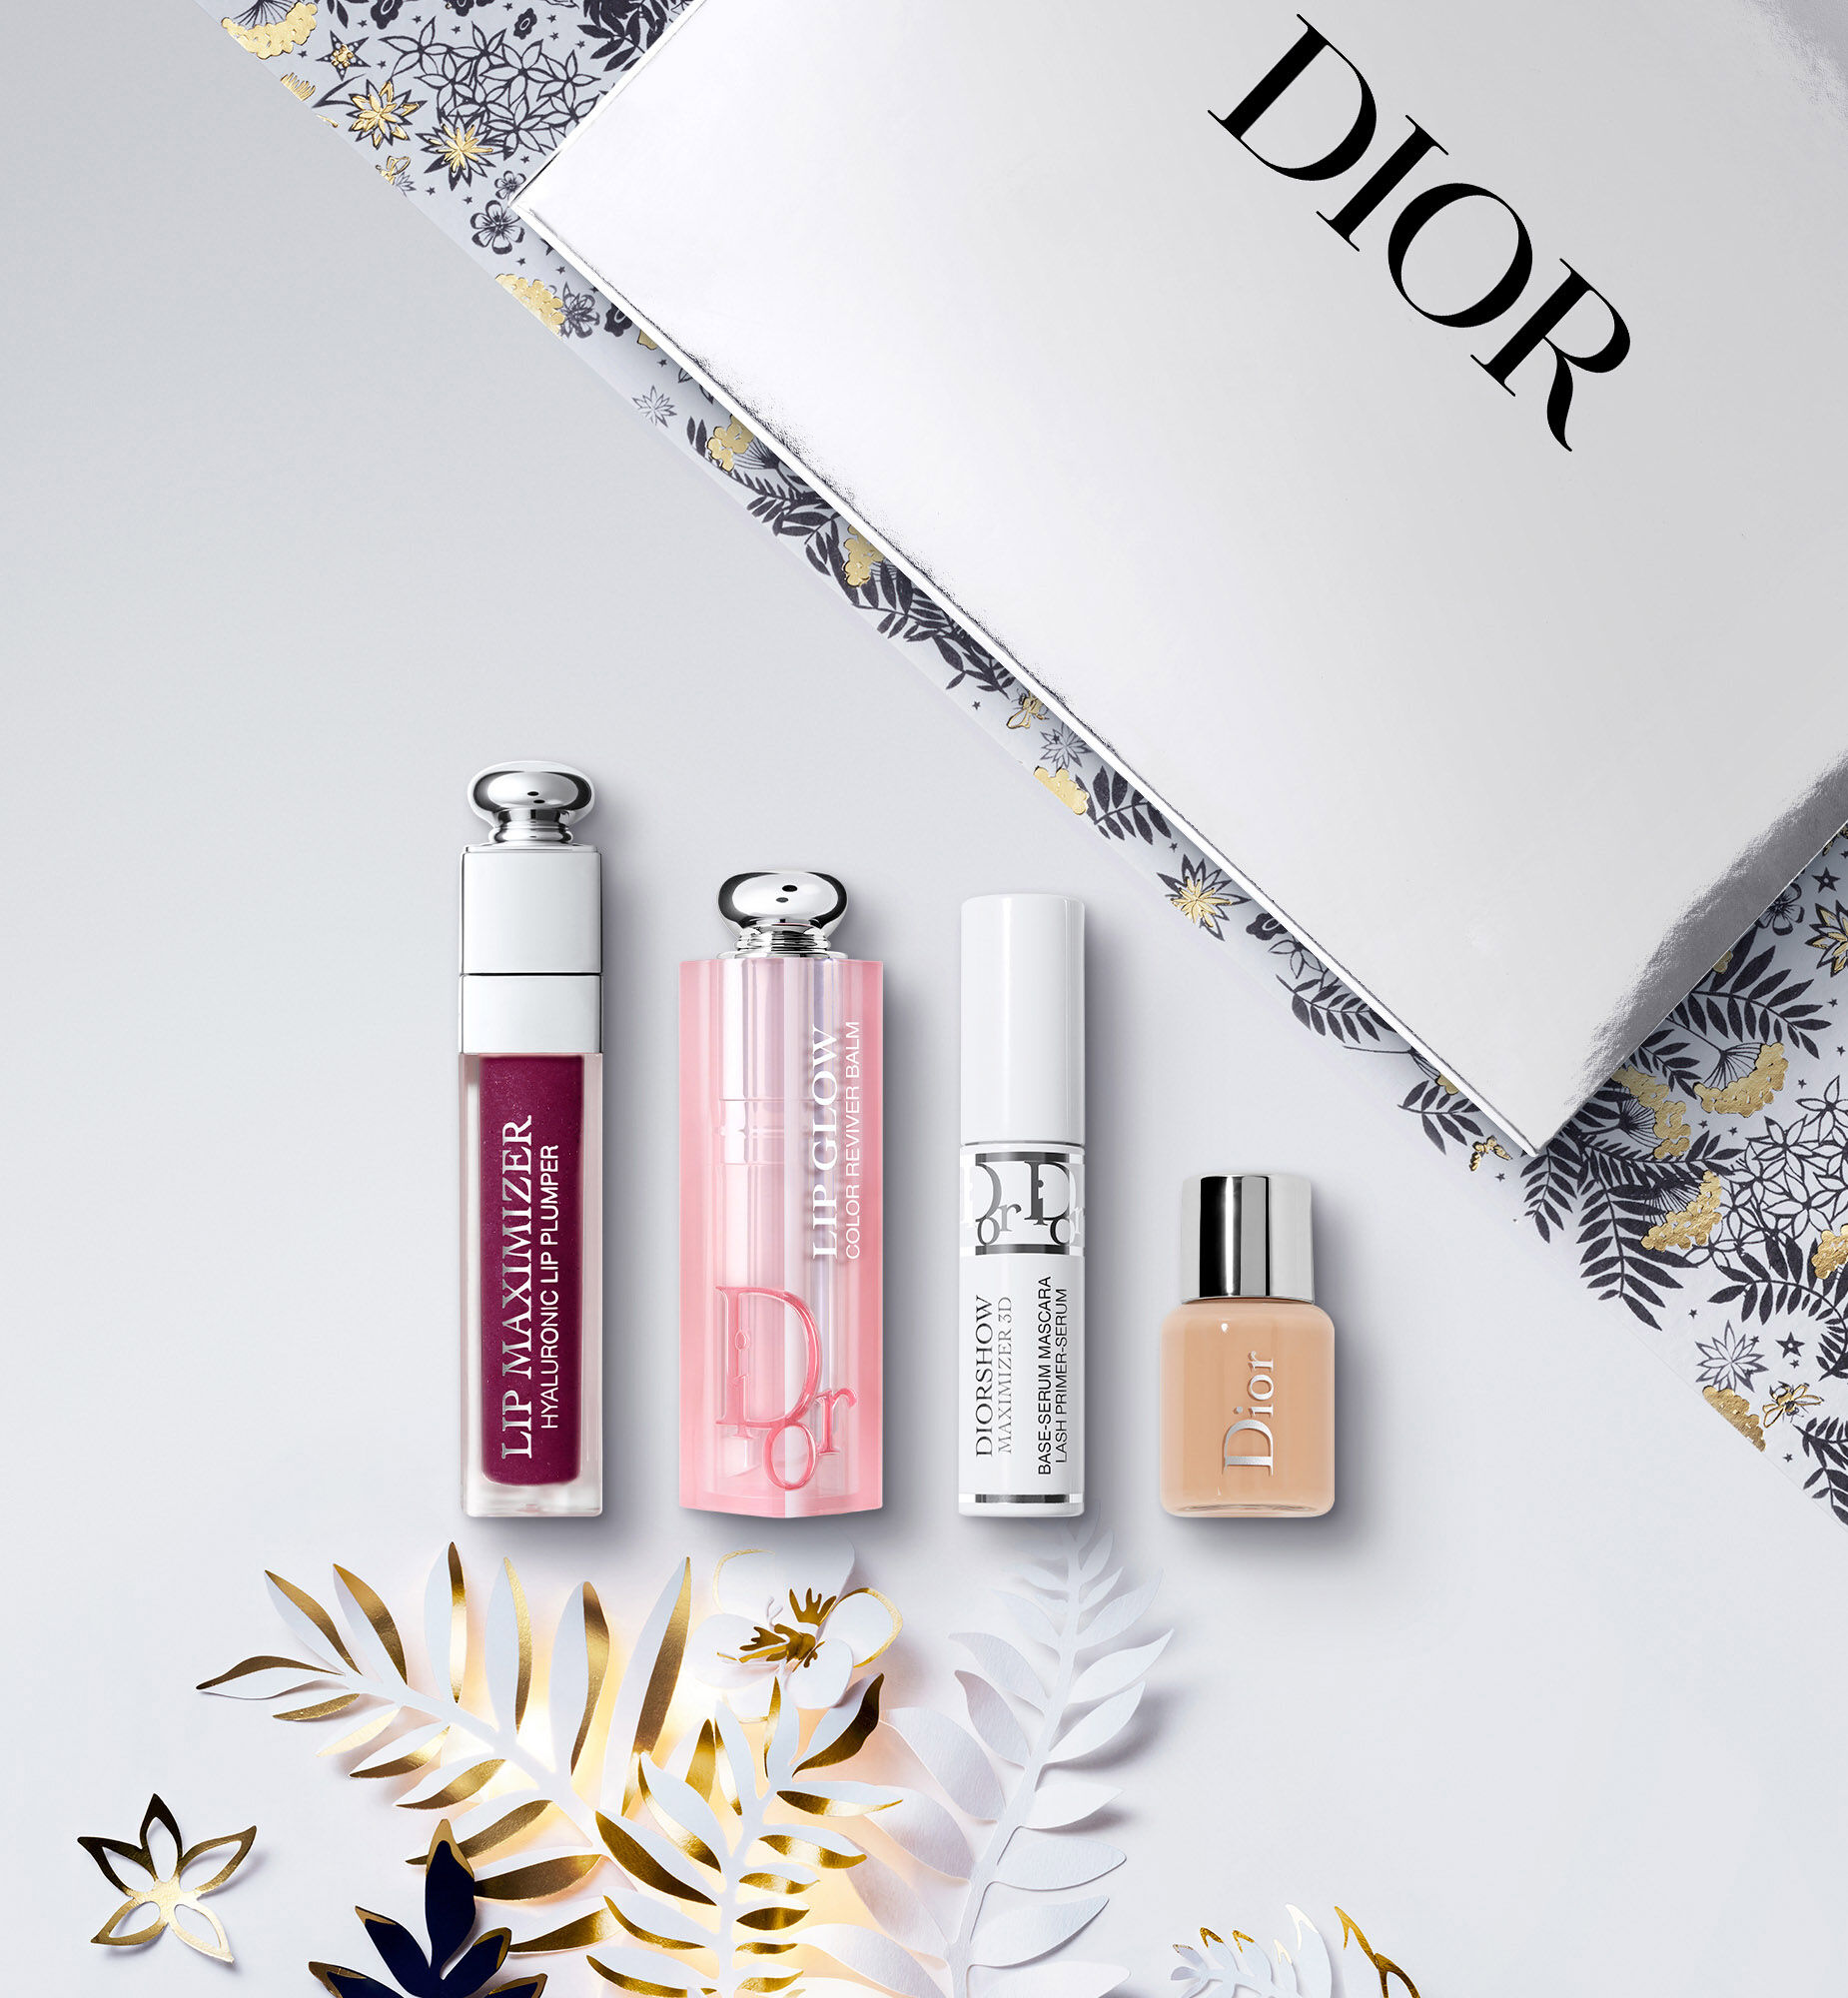 Buy Christian Dior Diorshow Couture Eye Makeup Set Diorshow Iconic  Overcurl Mascara  Mini 5 Couleurs Eyeshadow Palette 2pcs Online at Low  Prices in India  Amazonin